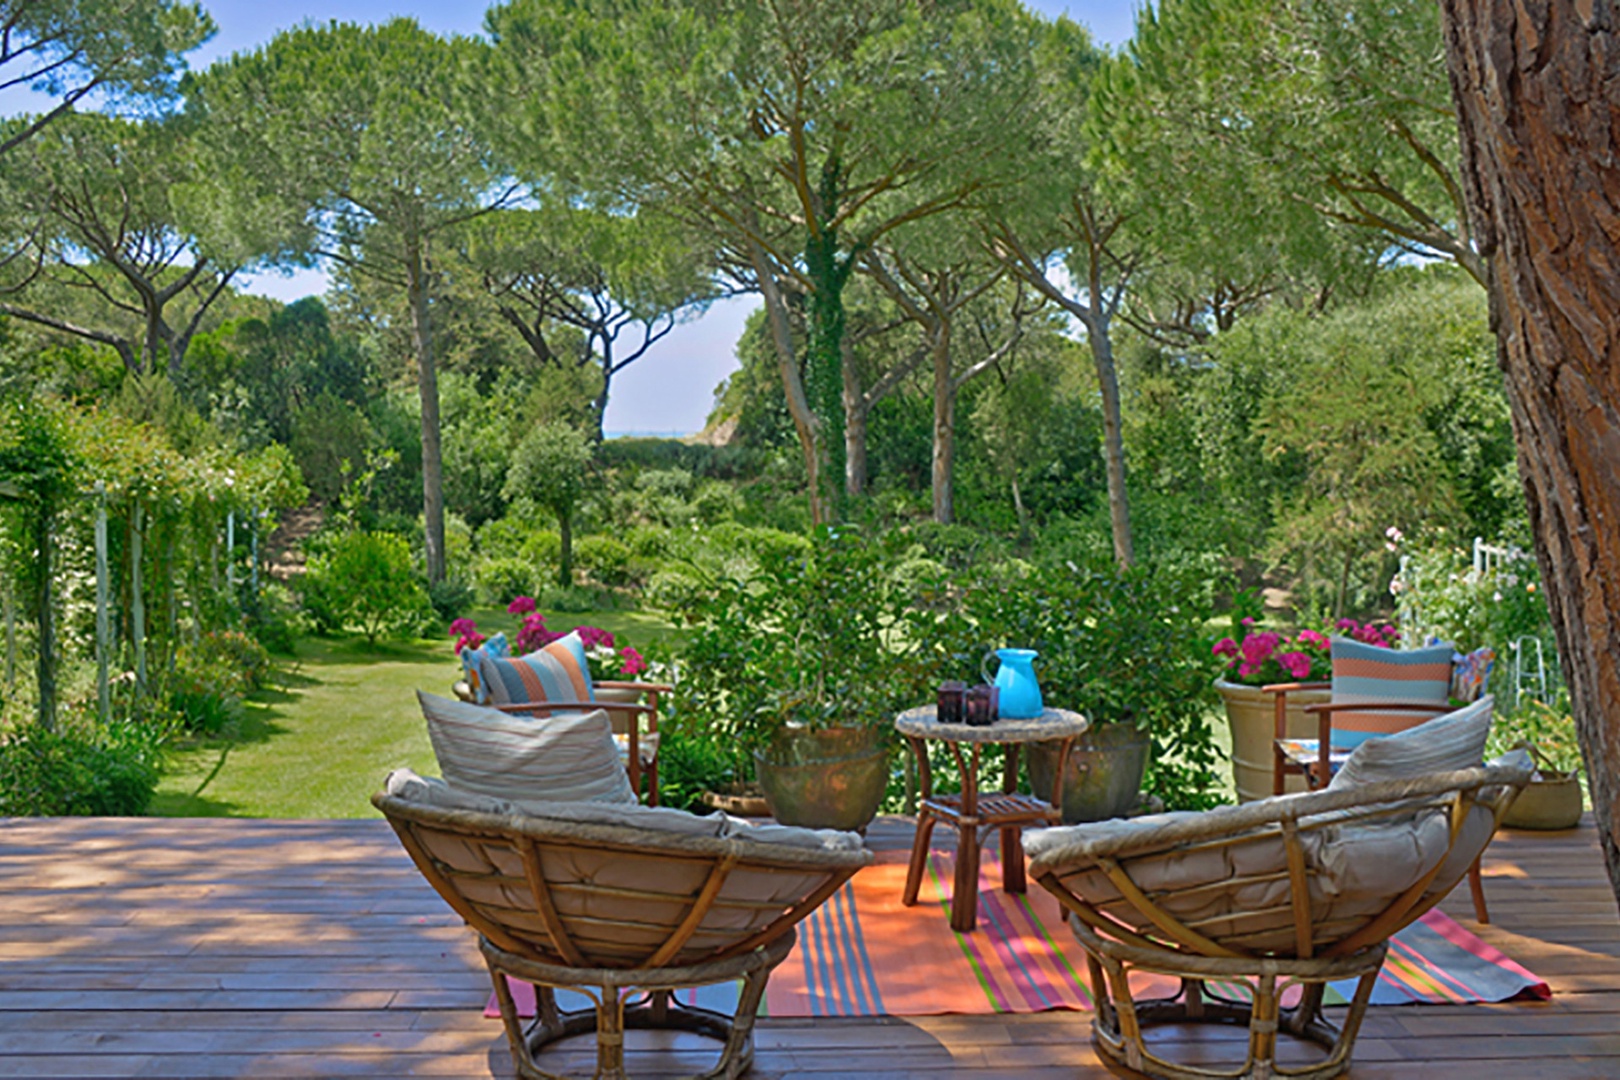 The estate is richly planted with fruit and olive trees, flowers and iconic umbrella pines.